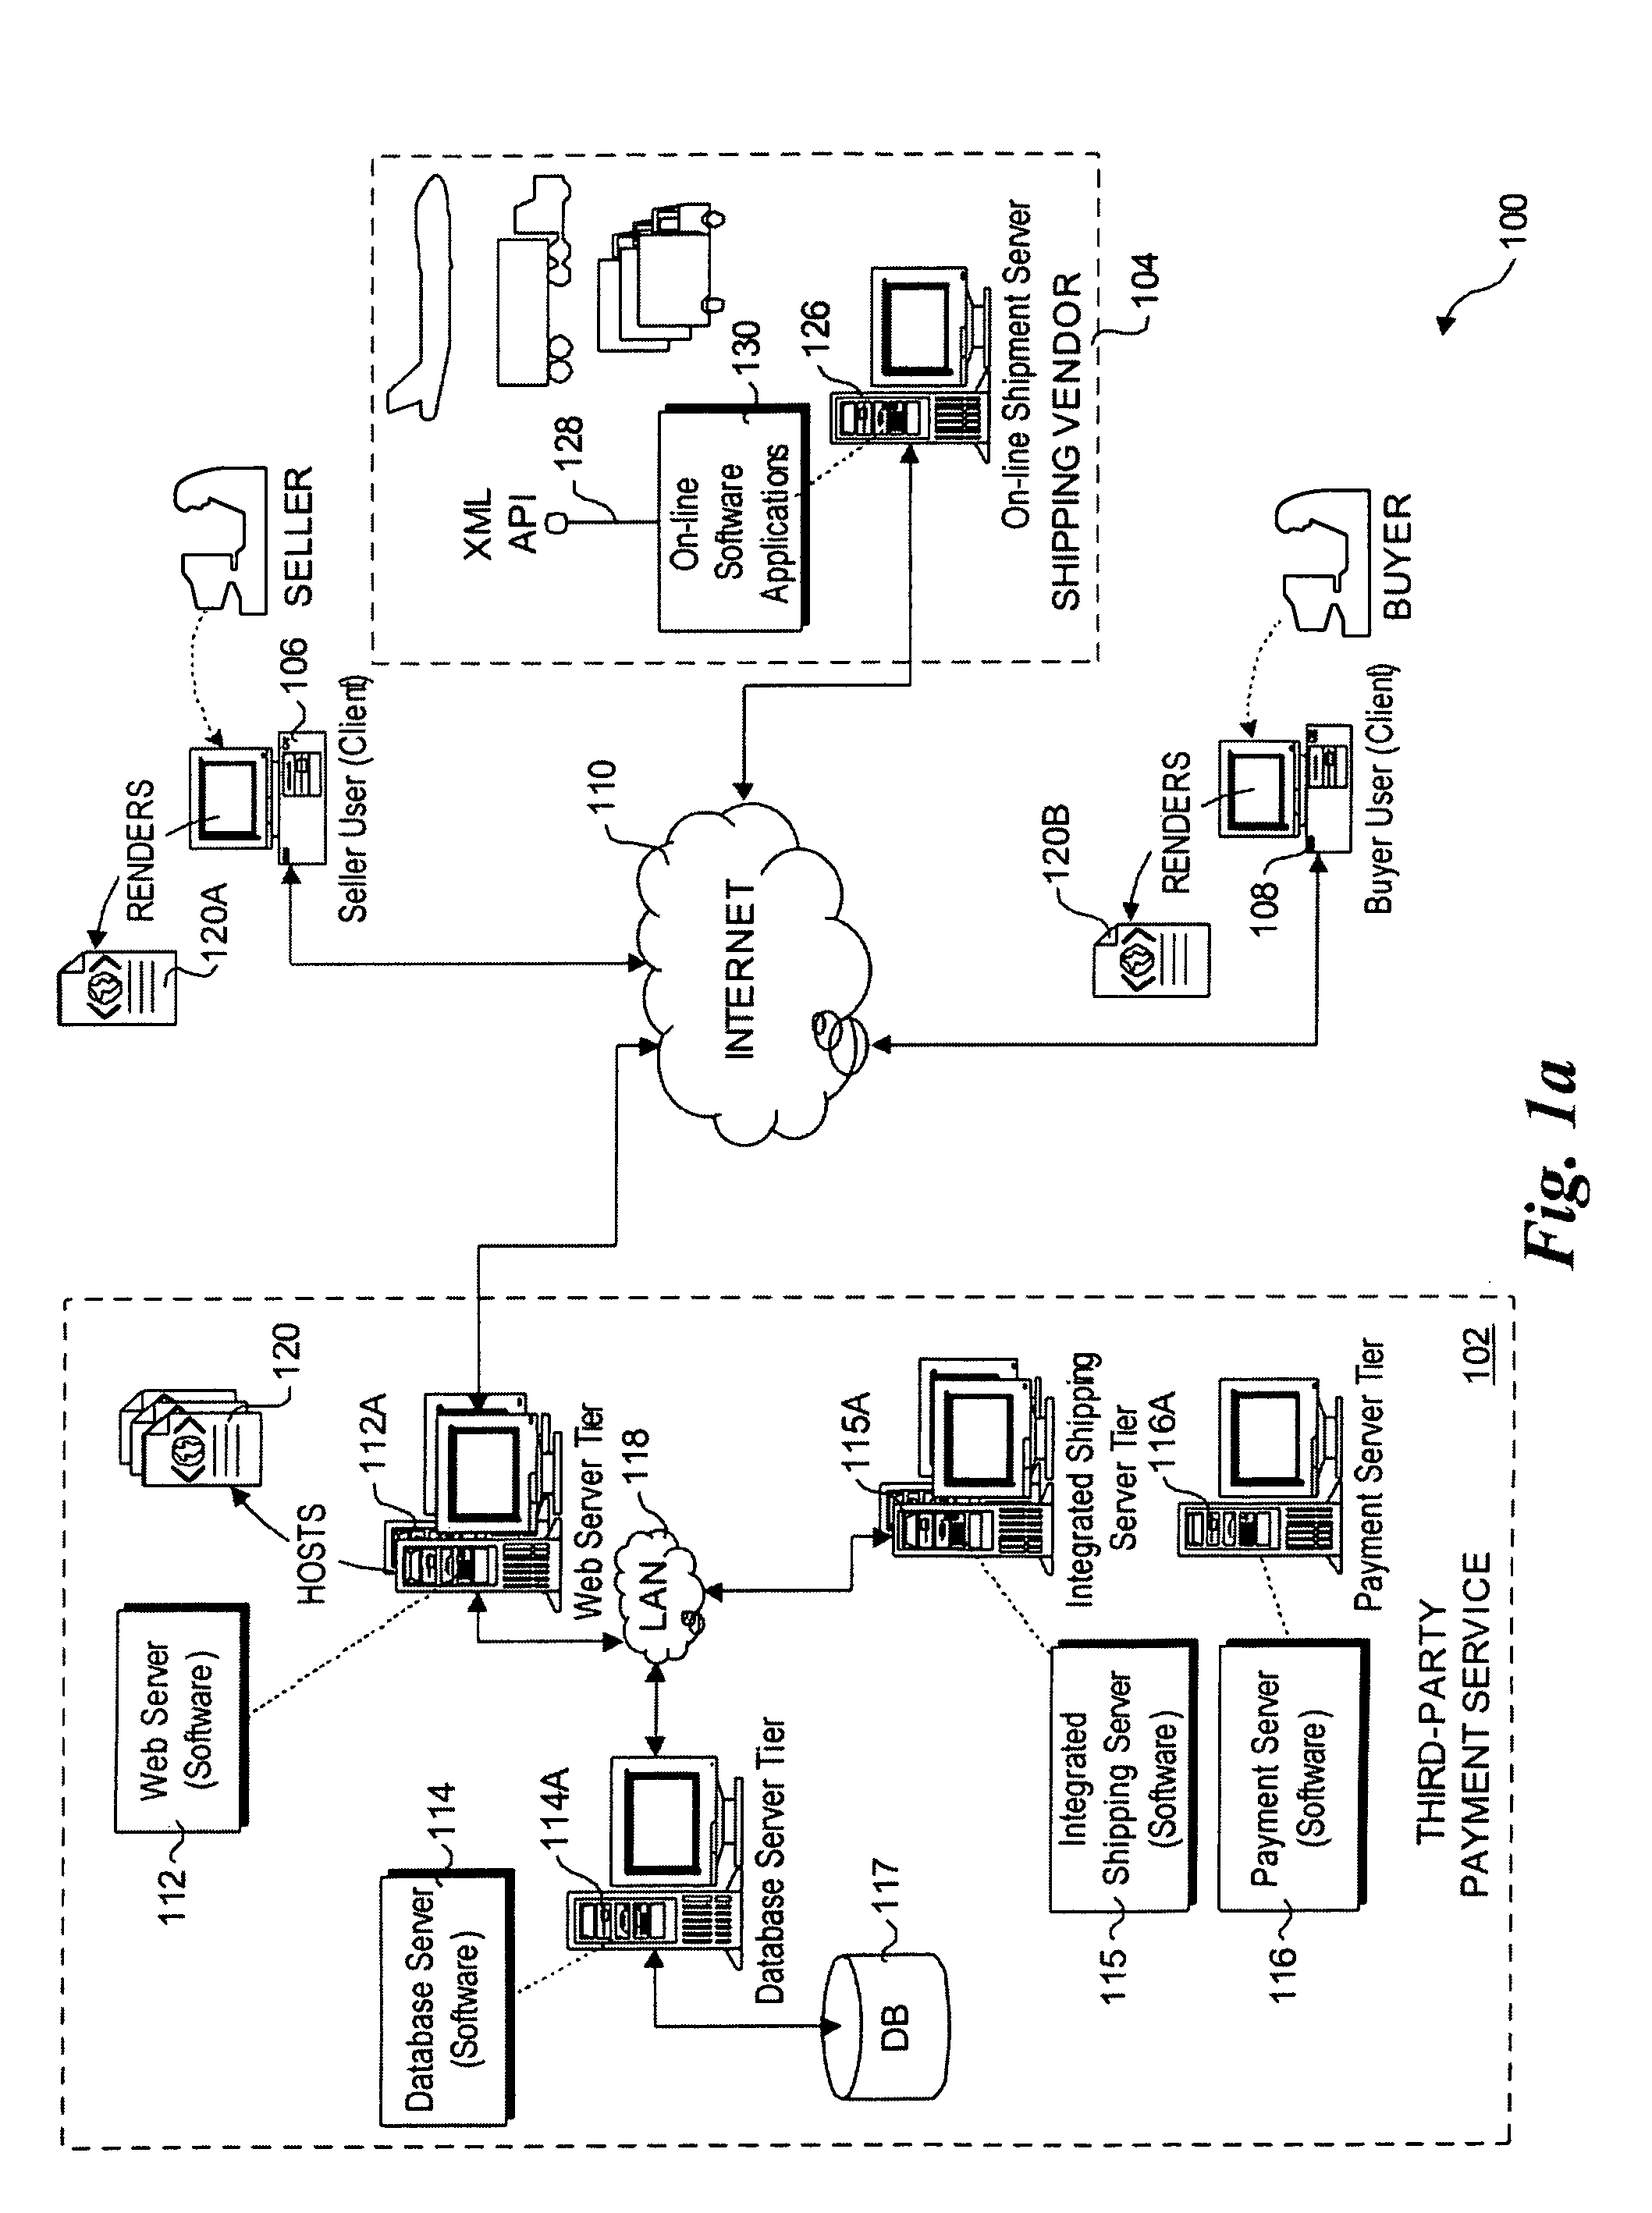 Method and system for facilitating shipping via third-party payment service